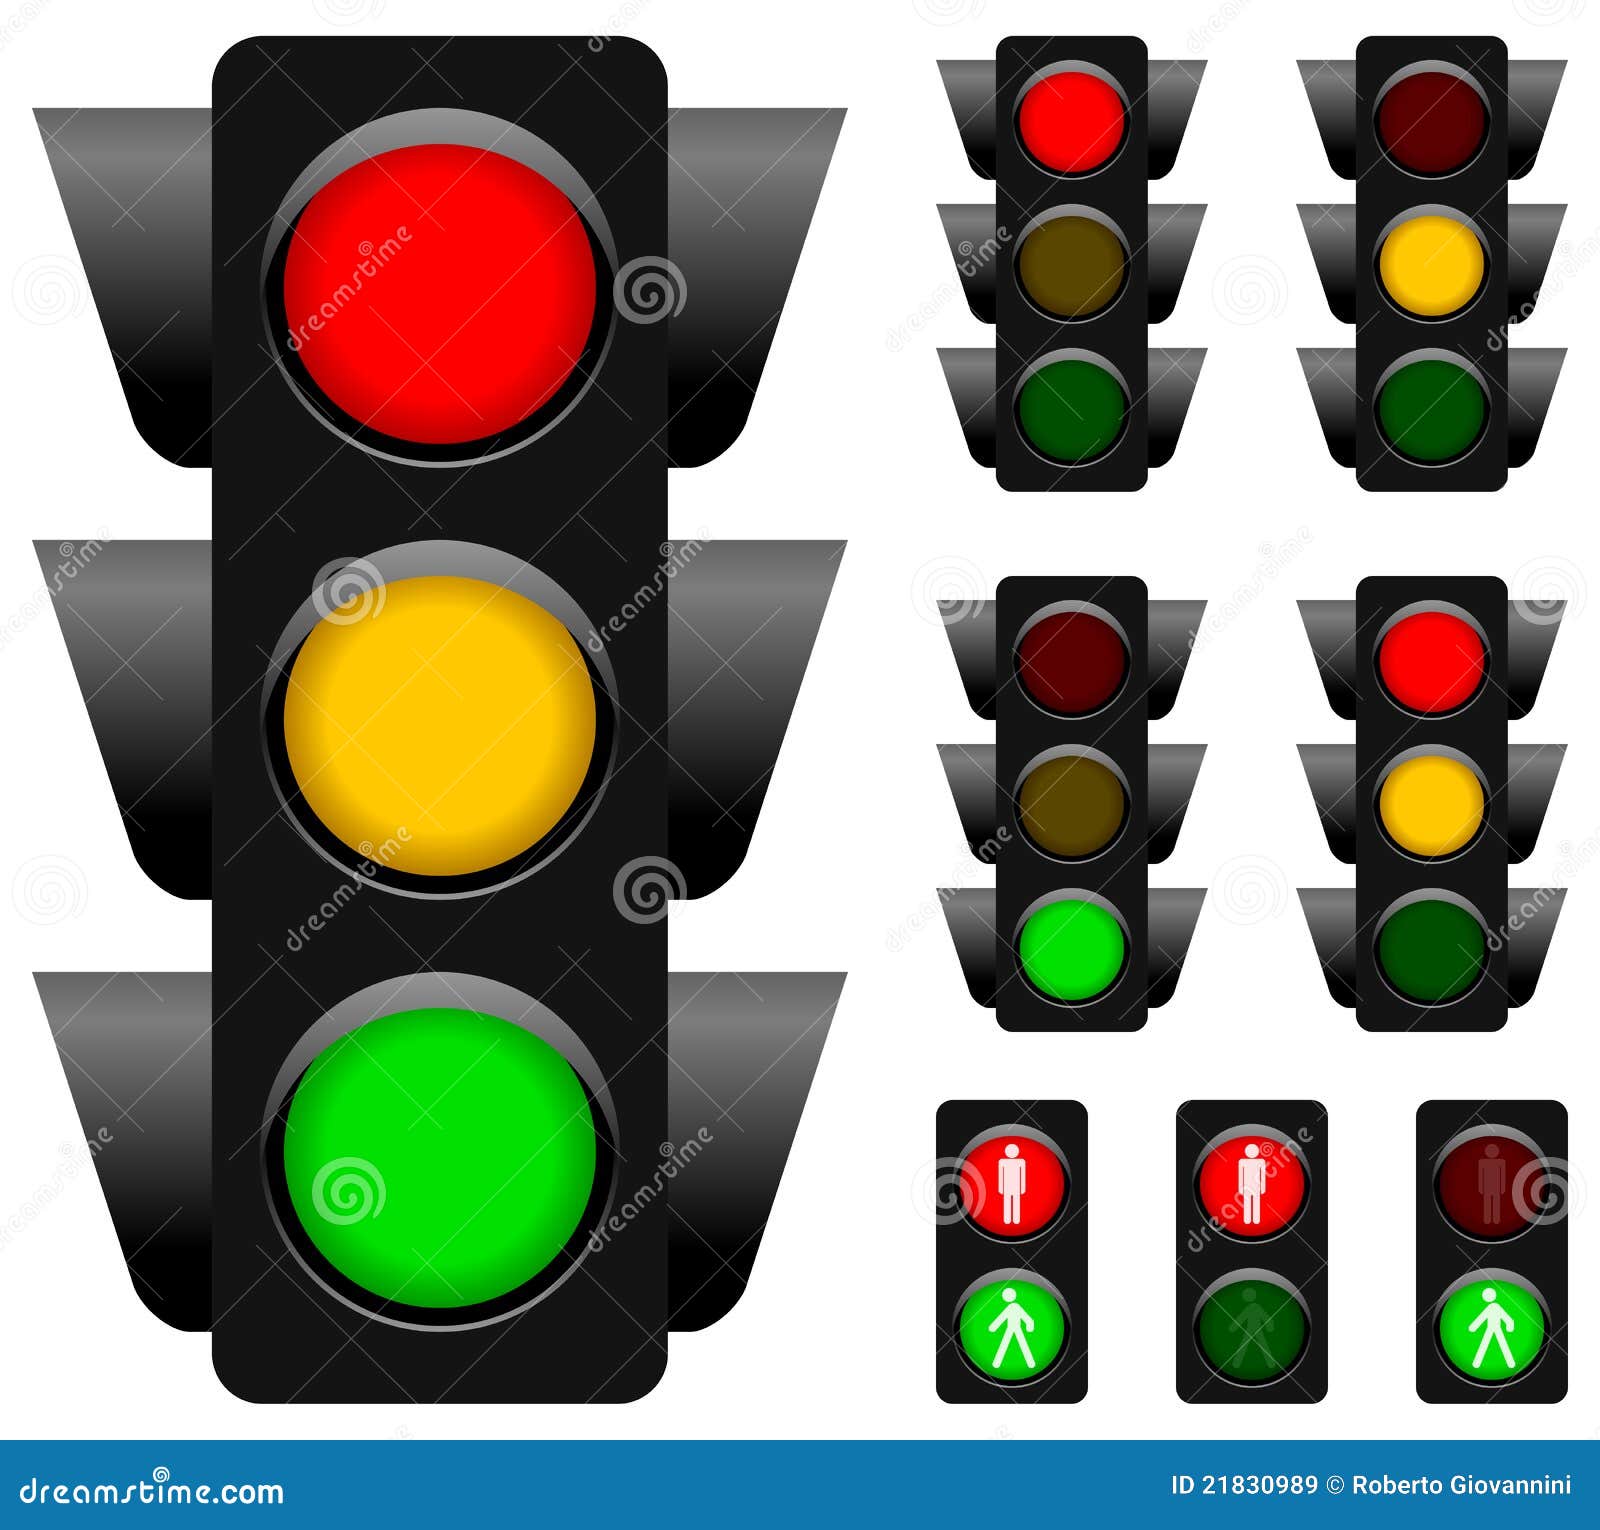 traffic light collection